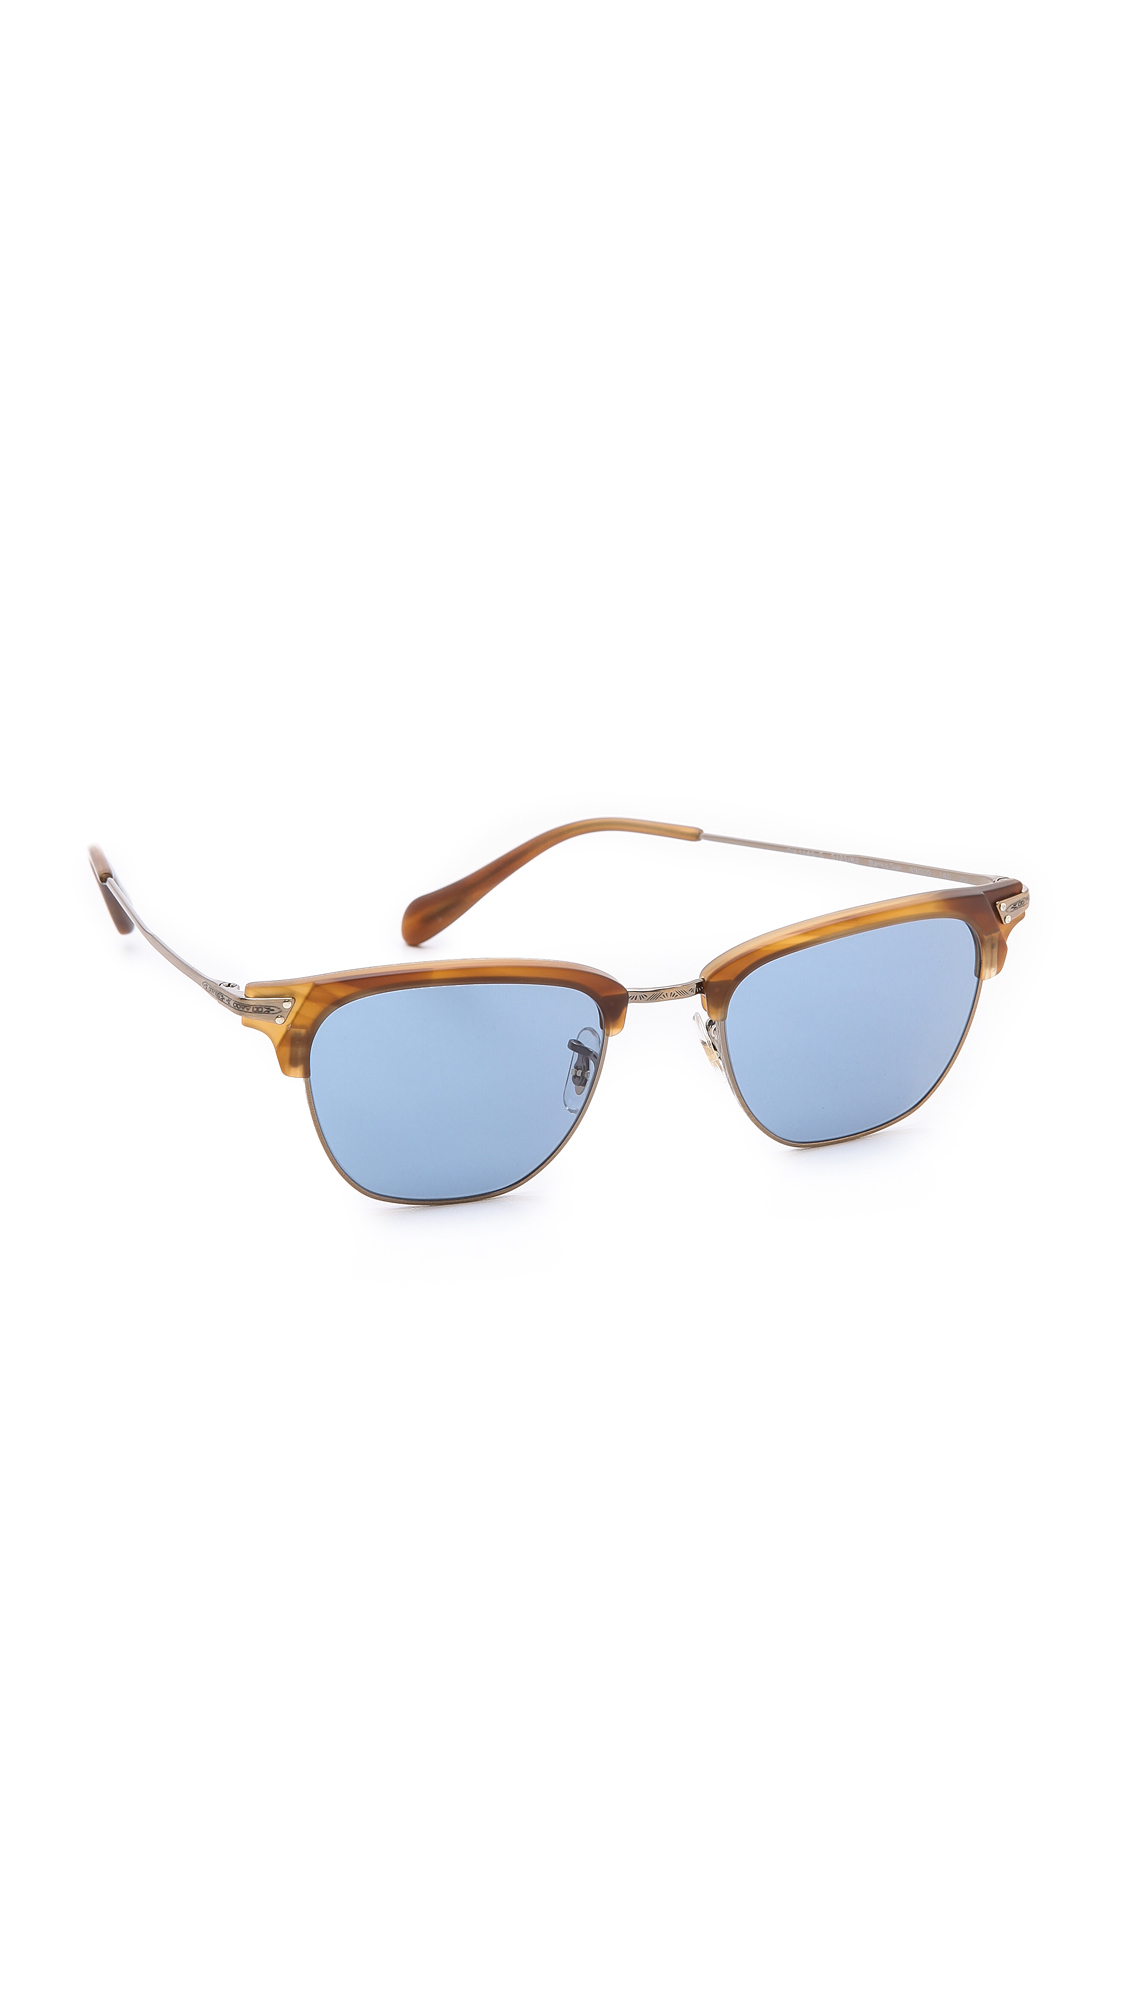 Oliver Peoples Banks Sun Sunglasses in Natural | Lyst